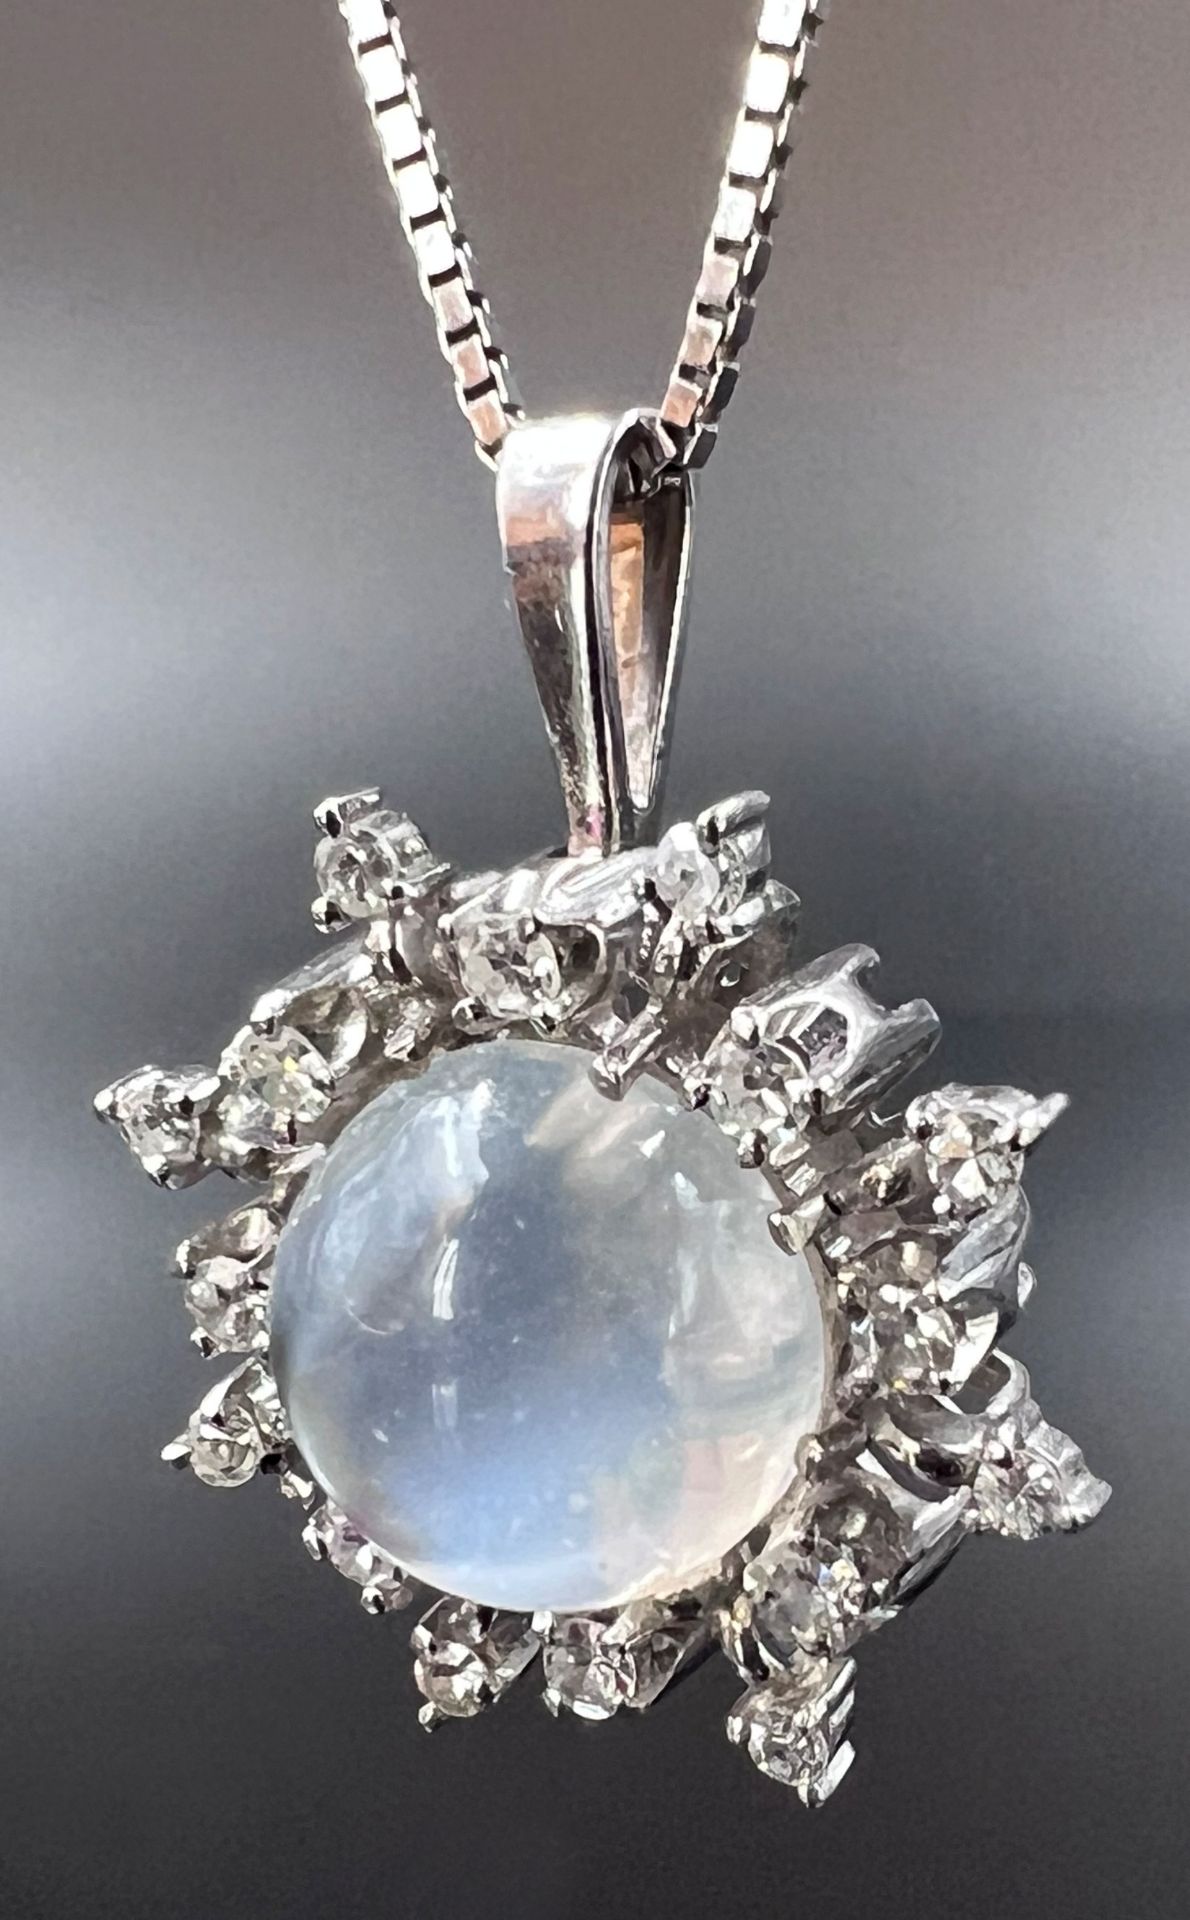 Pendant. 750 white gold with moonstone and diamonds. Necklace 585 white gold. - Image 3 of 7